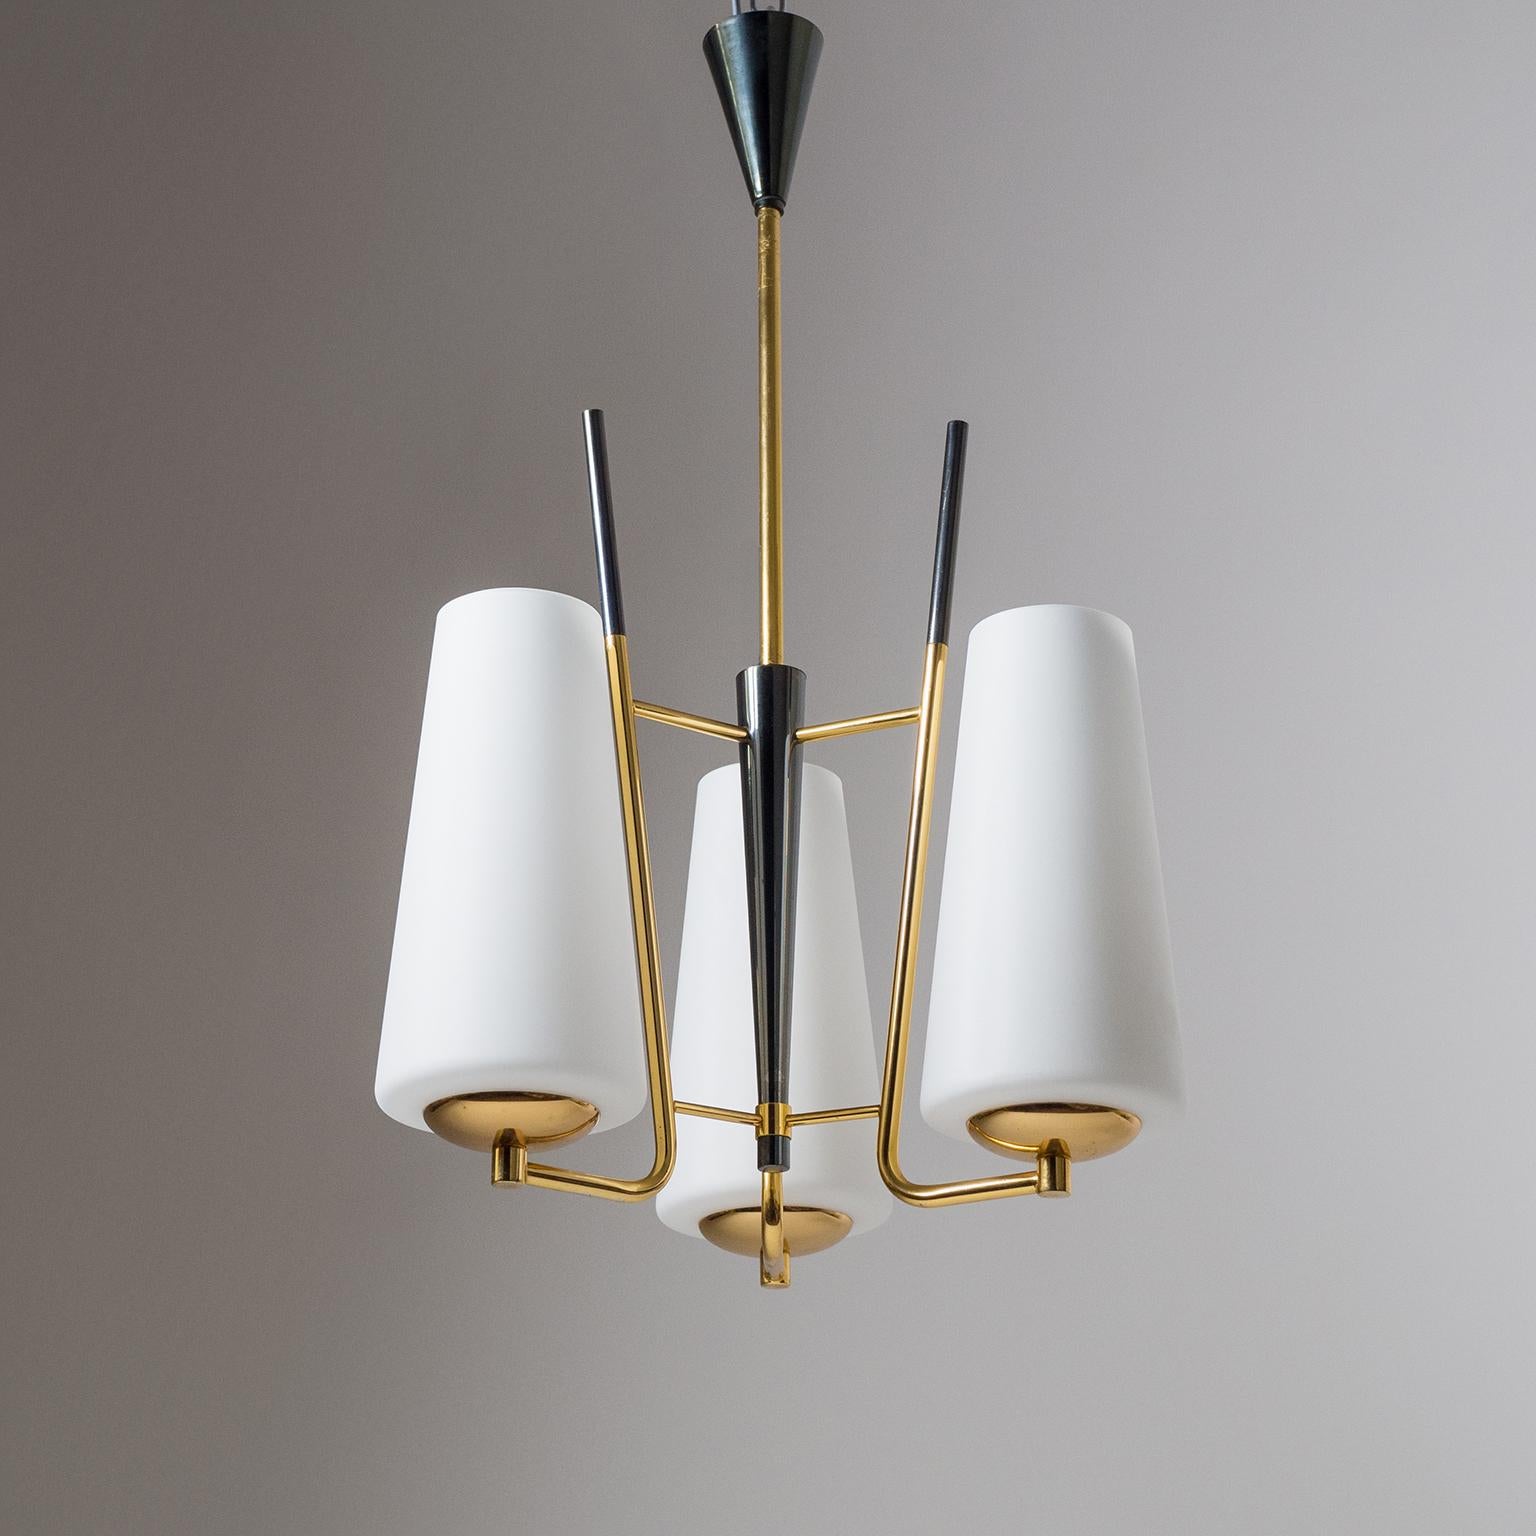 Very fine French modernist chandelier from the 1950s. Gilt brass hardware partially patinated in a dark 'gun-metal' color with three large (9.5inches/25cm) satin glass diffusers. Very good original condition with just minor patina on the metal